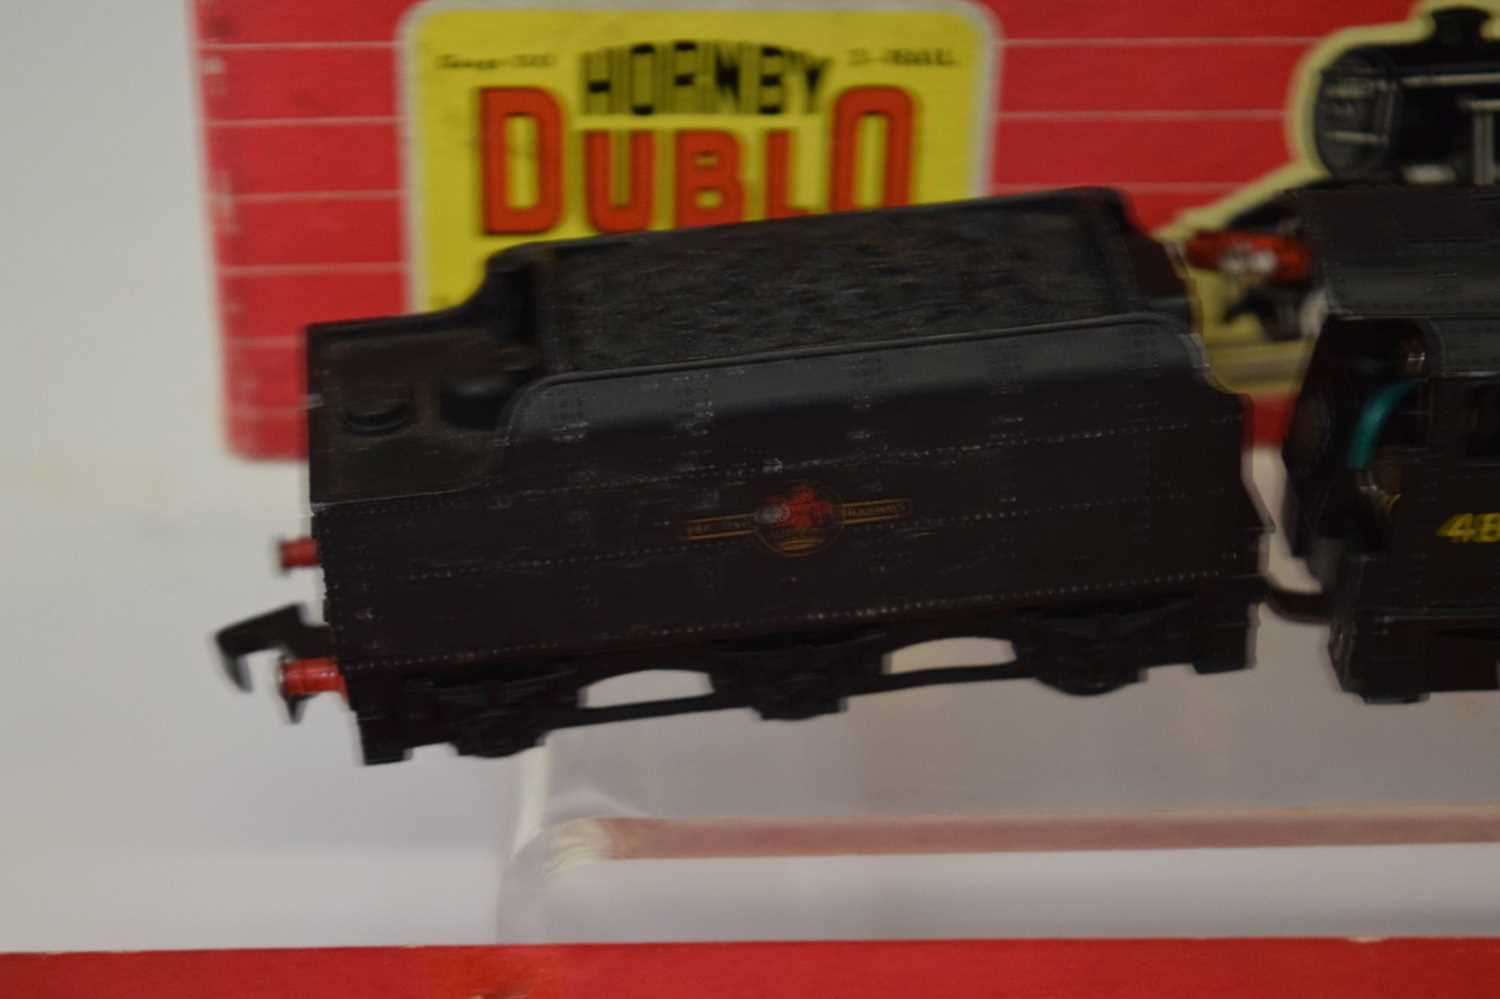 Hornby Dublo - Two boxed 00 gauge railway trainset locomotives with tenders - Image 5 of 8